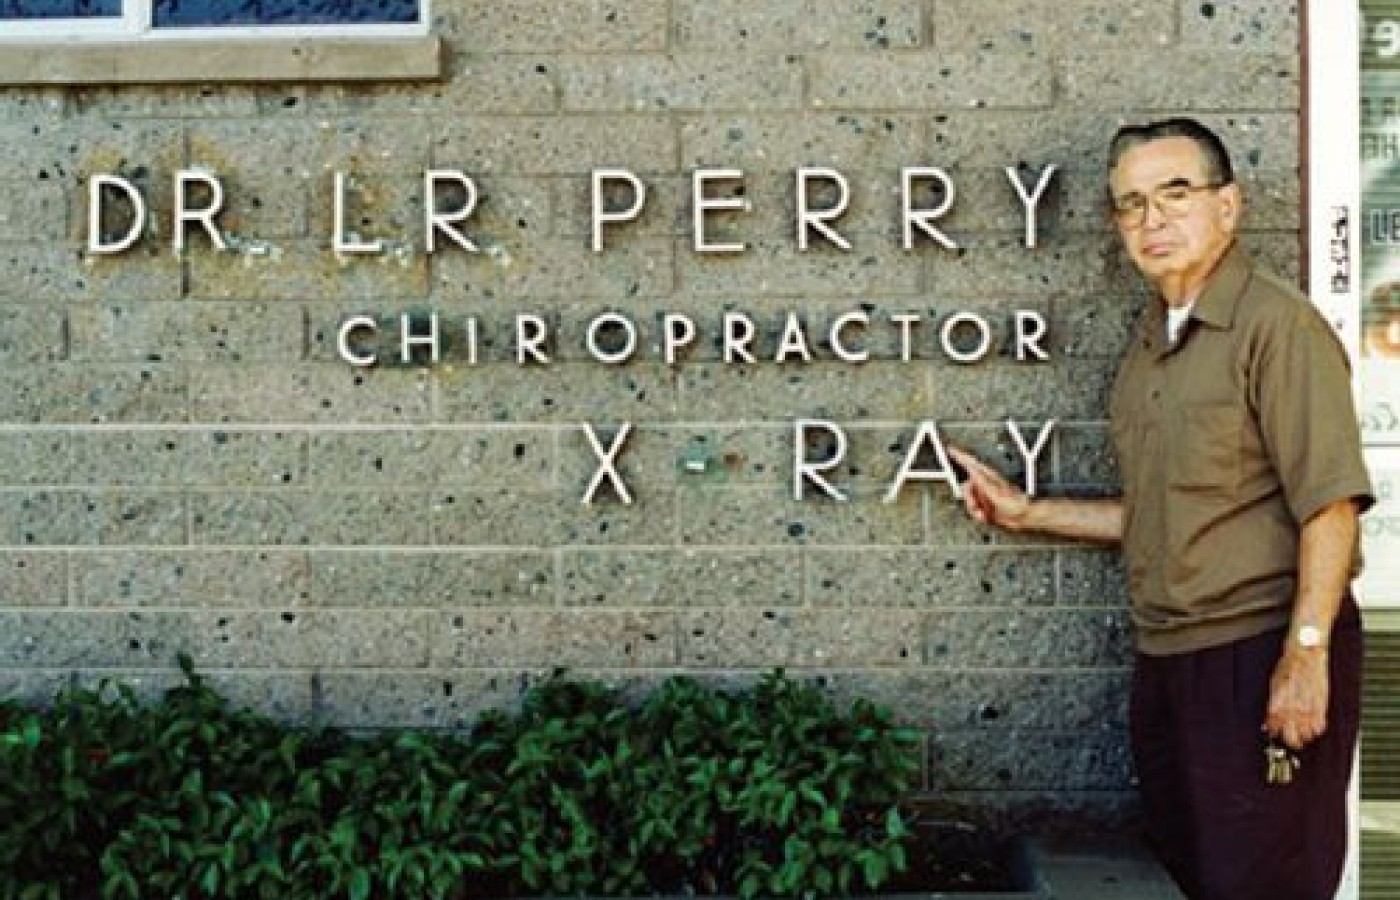 Dr. LeRoy R. Perry